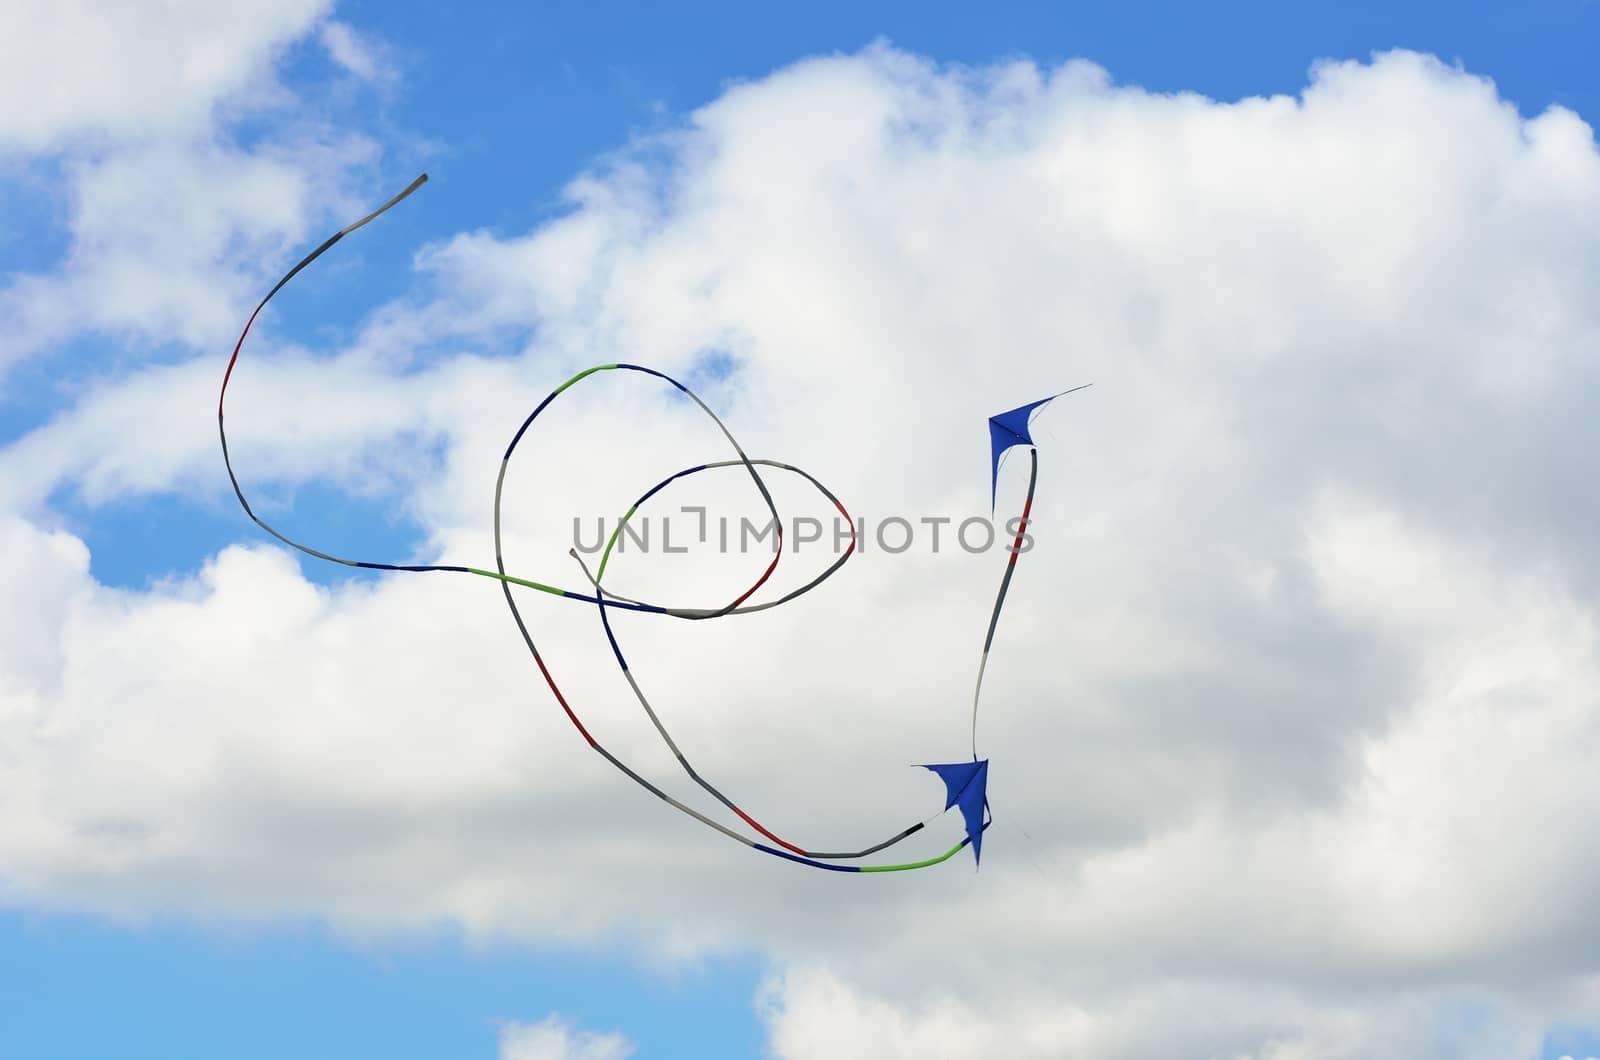 Two kites flying by pauws99